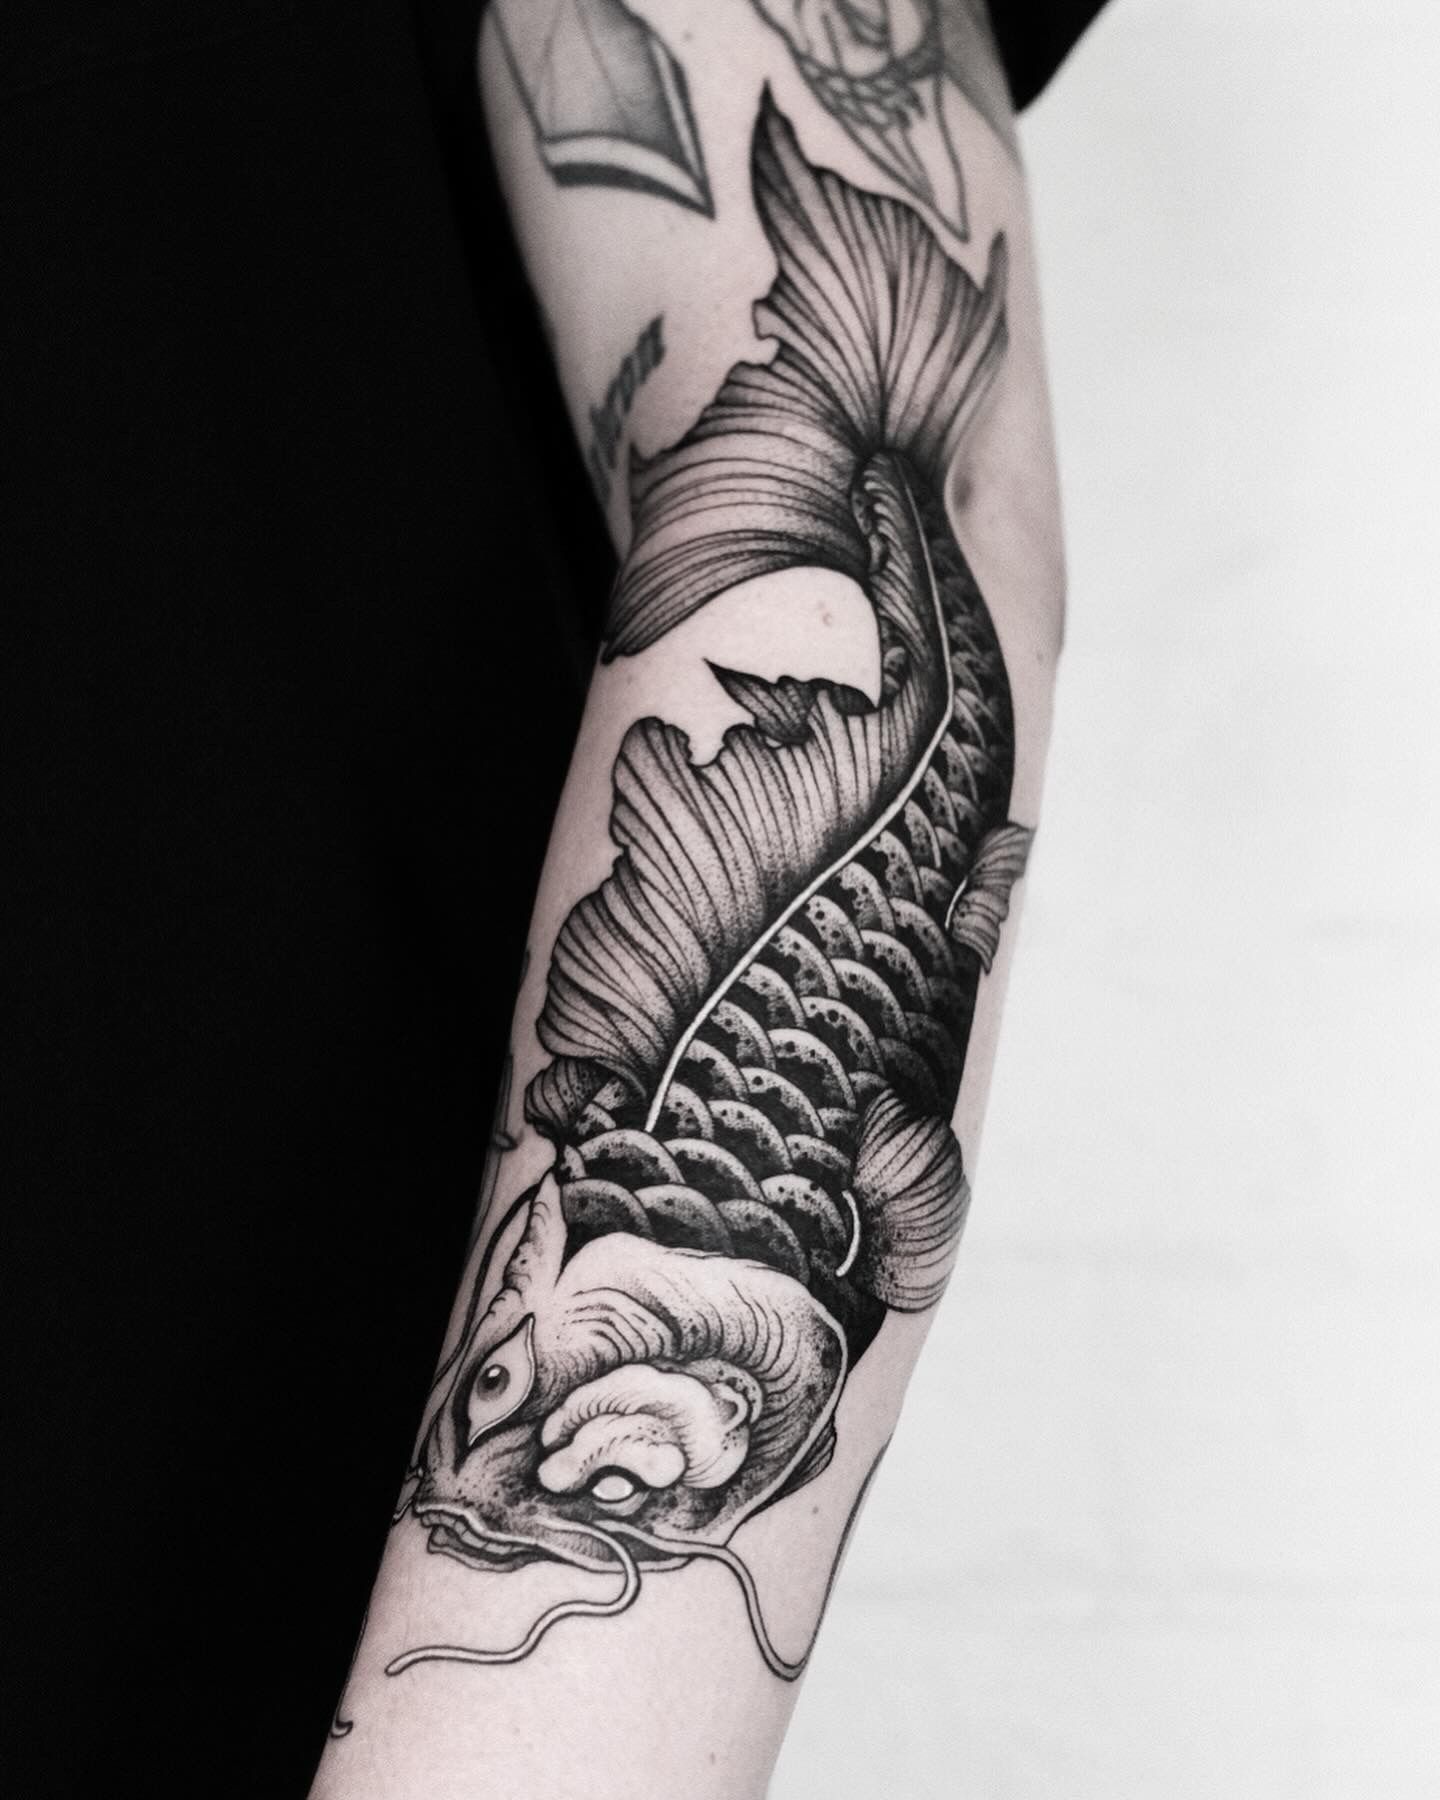 101 Best Simple Fishing Tattoo Ideas That Will Blow Your Mind!